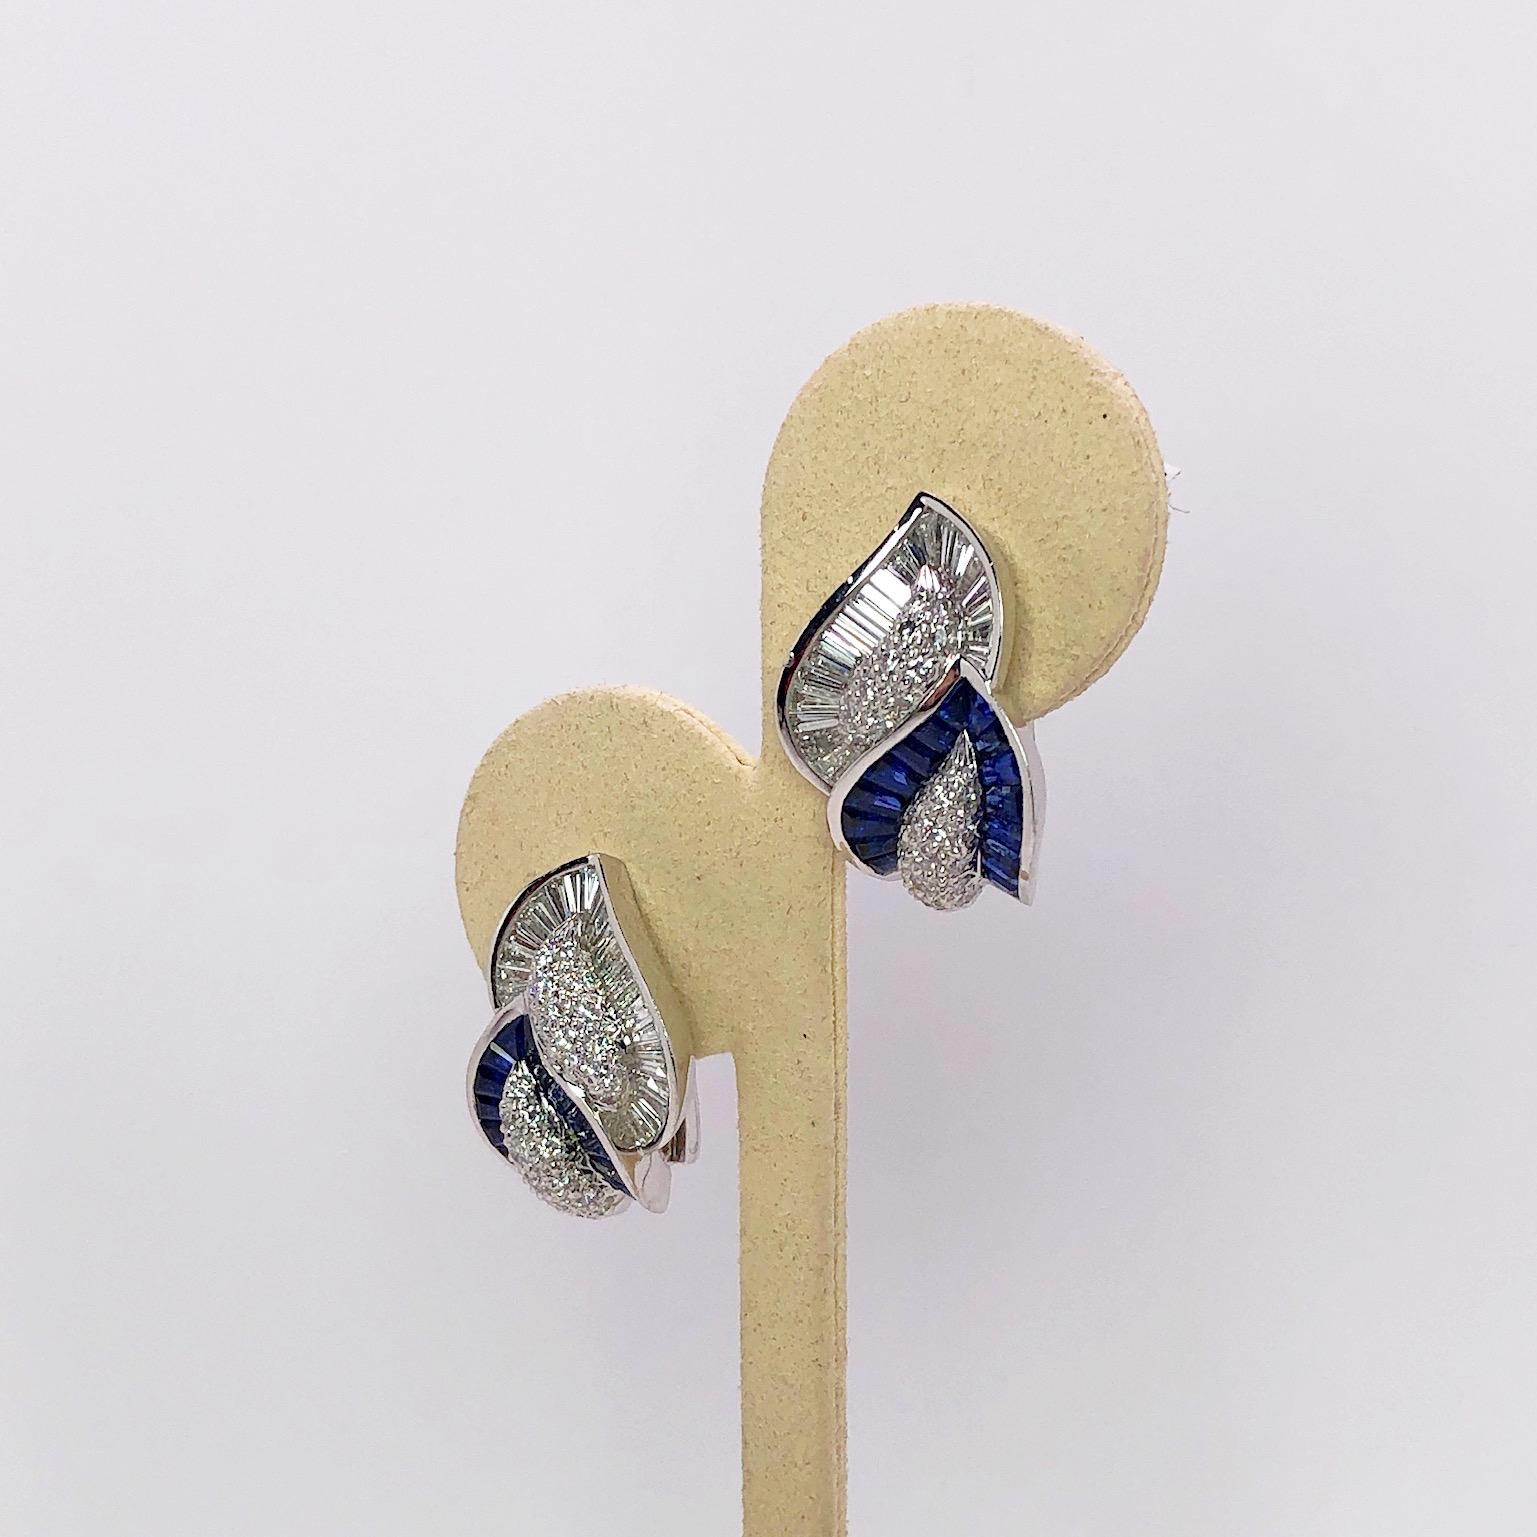 18 karat double leaf earrings .Each leaf centers a pave Diamond section. One leaf  is bordered with Diamond Baguettes, the other with Blue Sapphire Baguettes. The earrings have a collapsible post making them suitable for pierced and non pierced